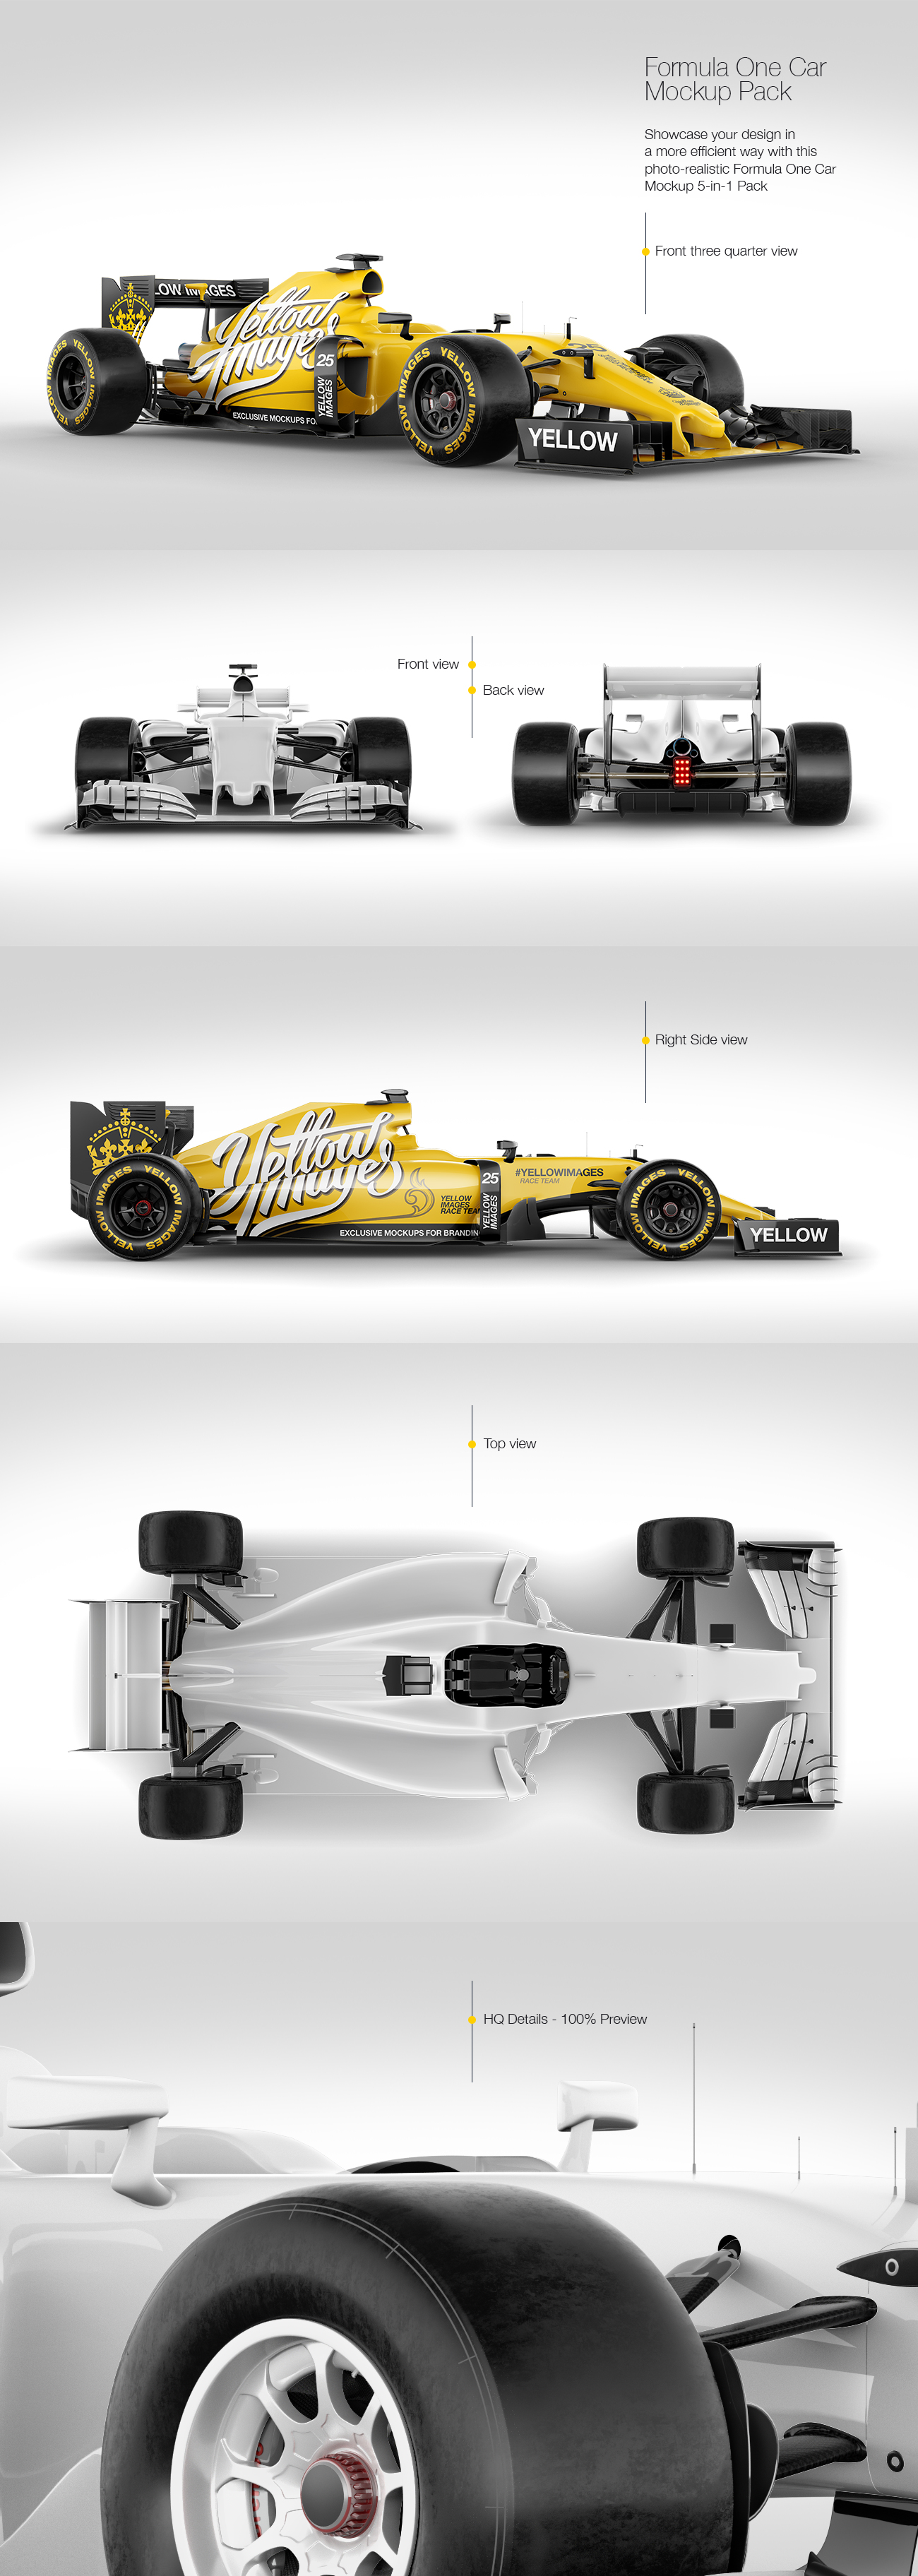 Formula One Car Mockup Pack in Vehicle Mockups on Yellow Images